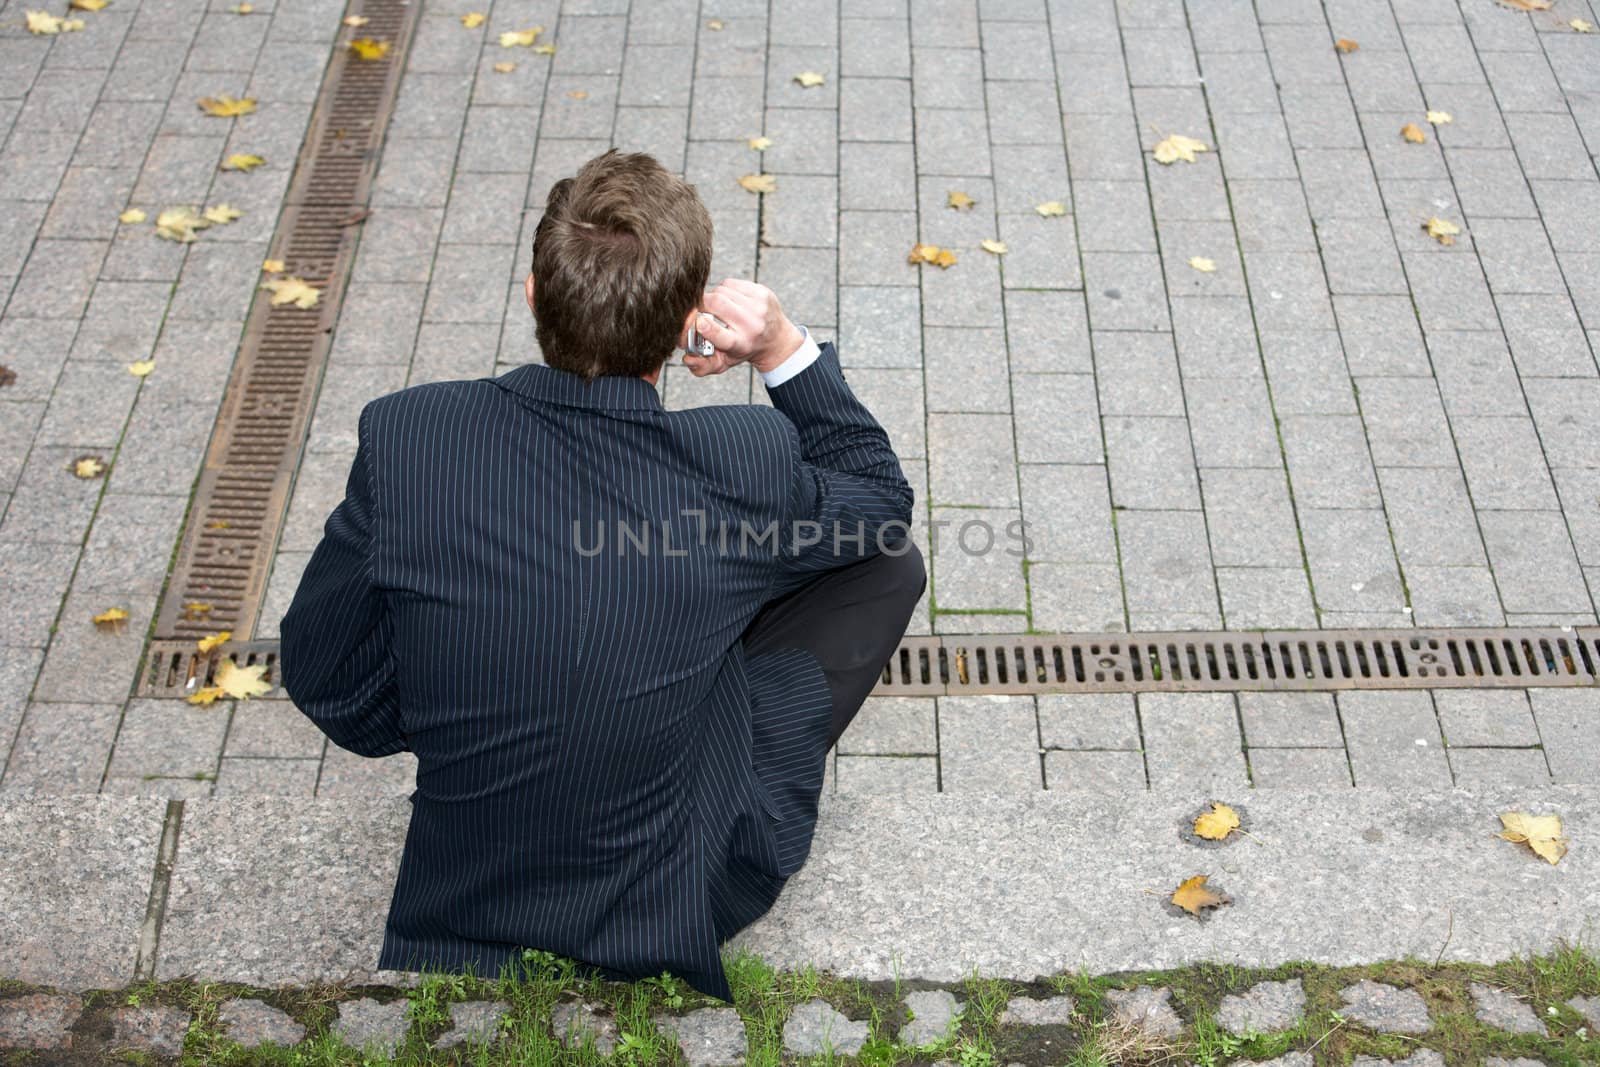 Man sitting alone, using cell phone